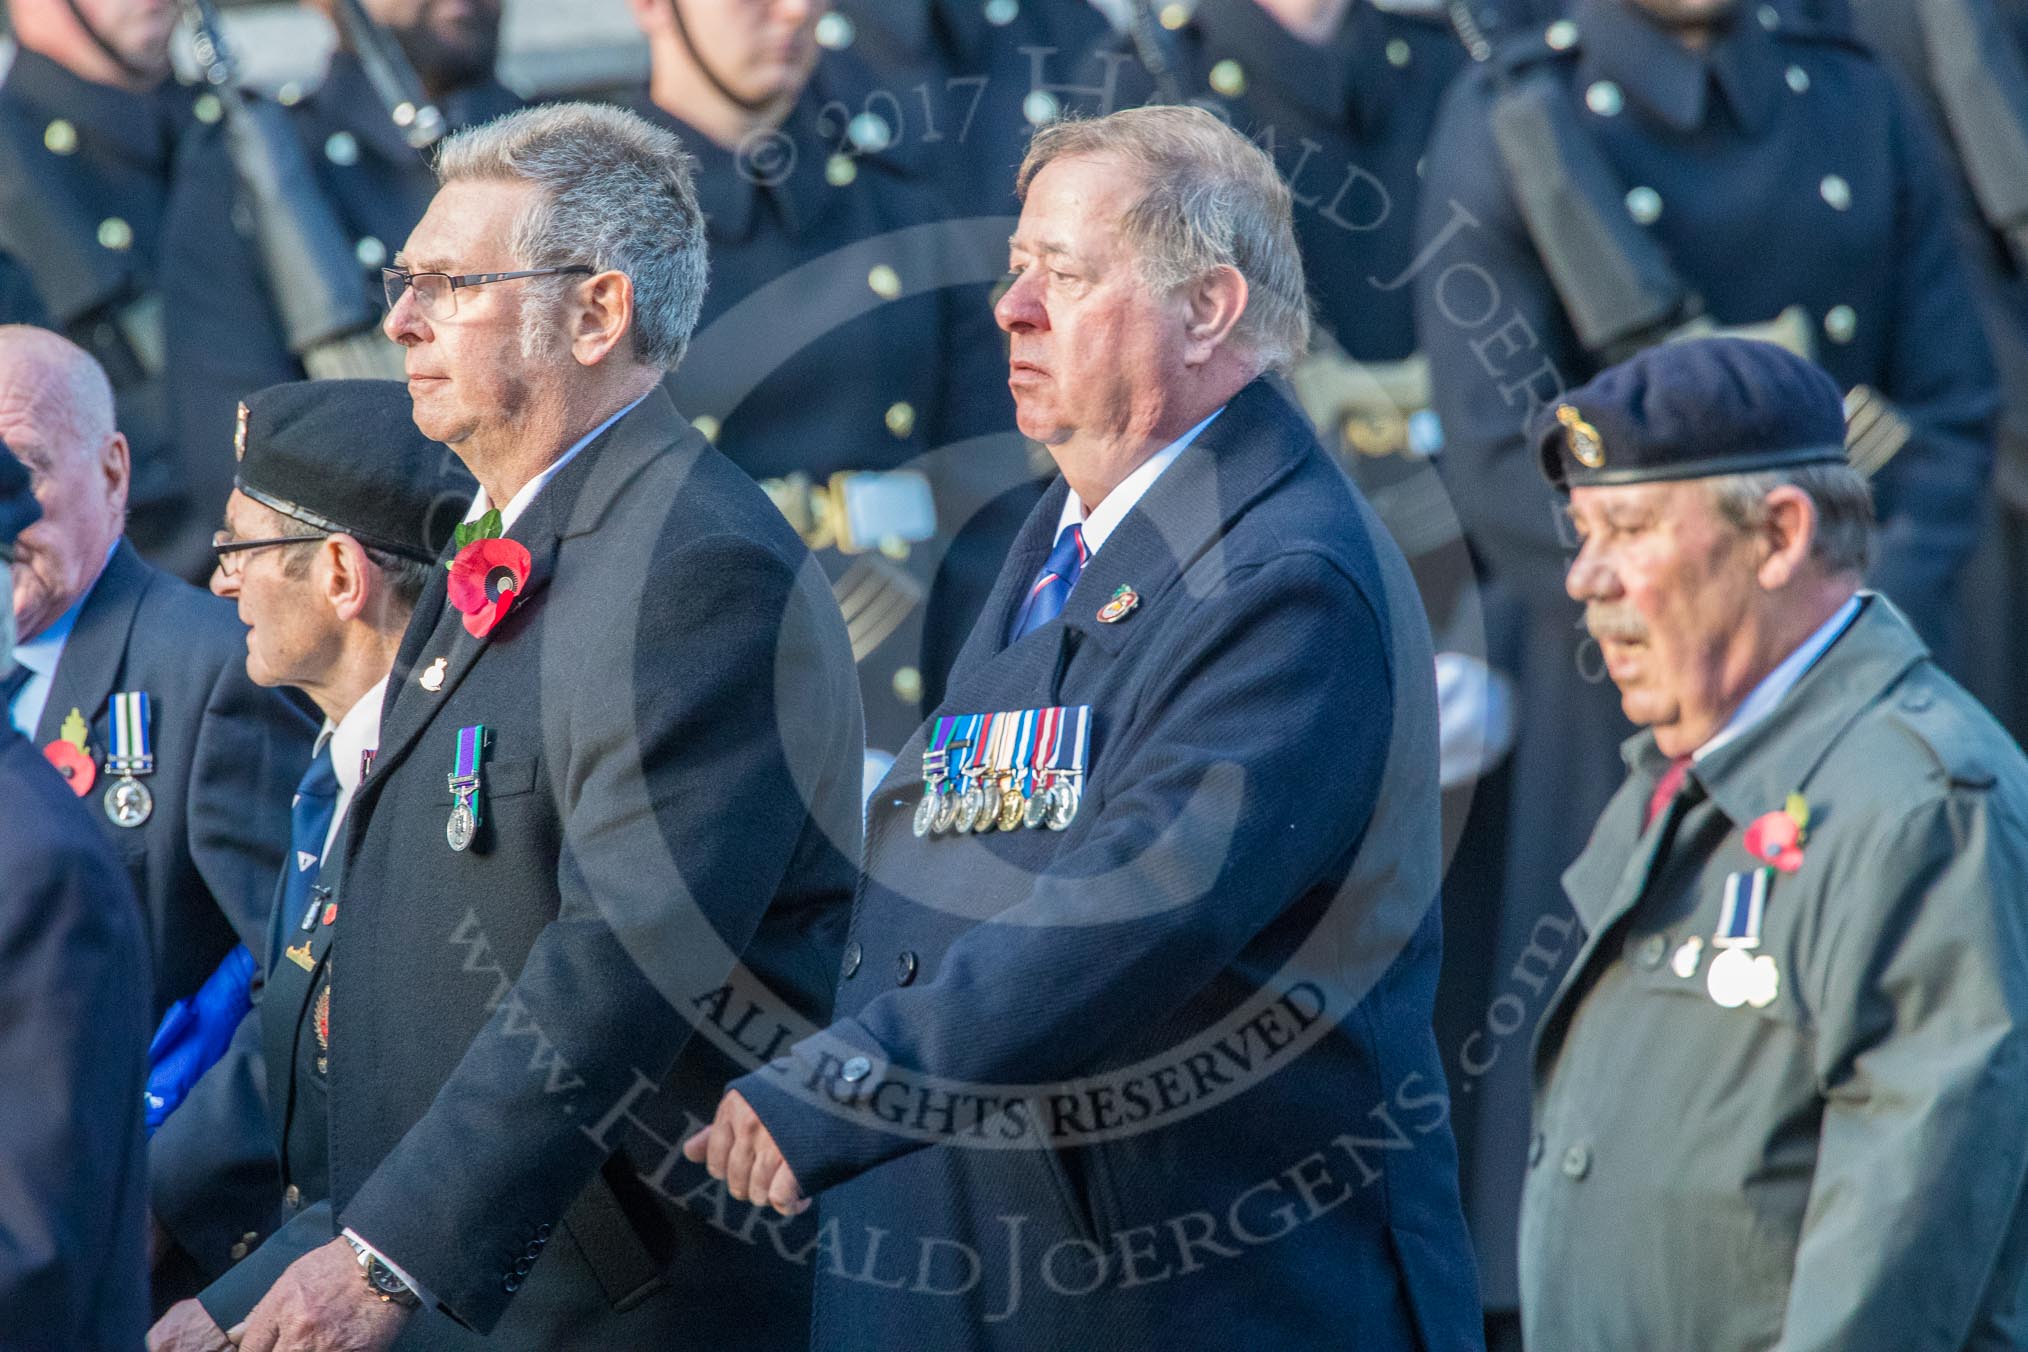 TON Class Association  (Group E31, 23 members) during the Royal British Legion March Past on Remembrance Sunday at the Cenotaph, Whitehall, Westminster, London, 11 November 2018, 11:45.